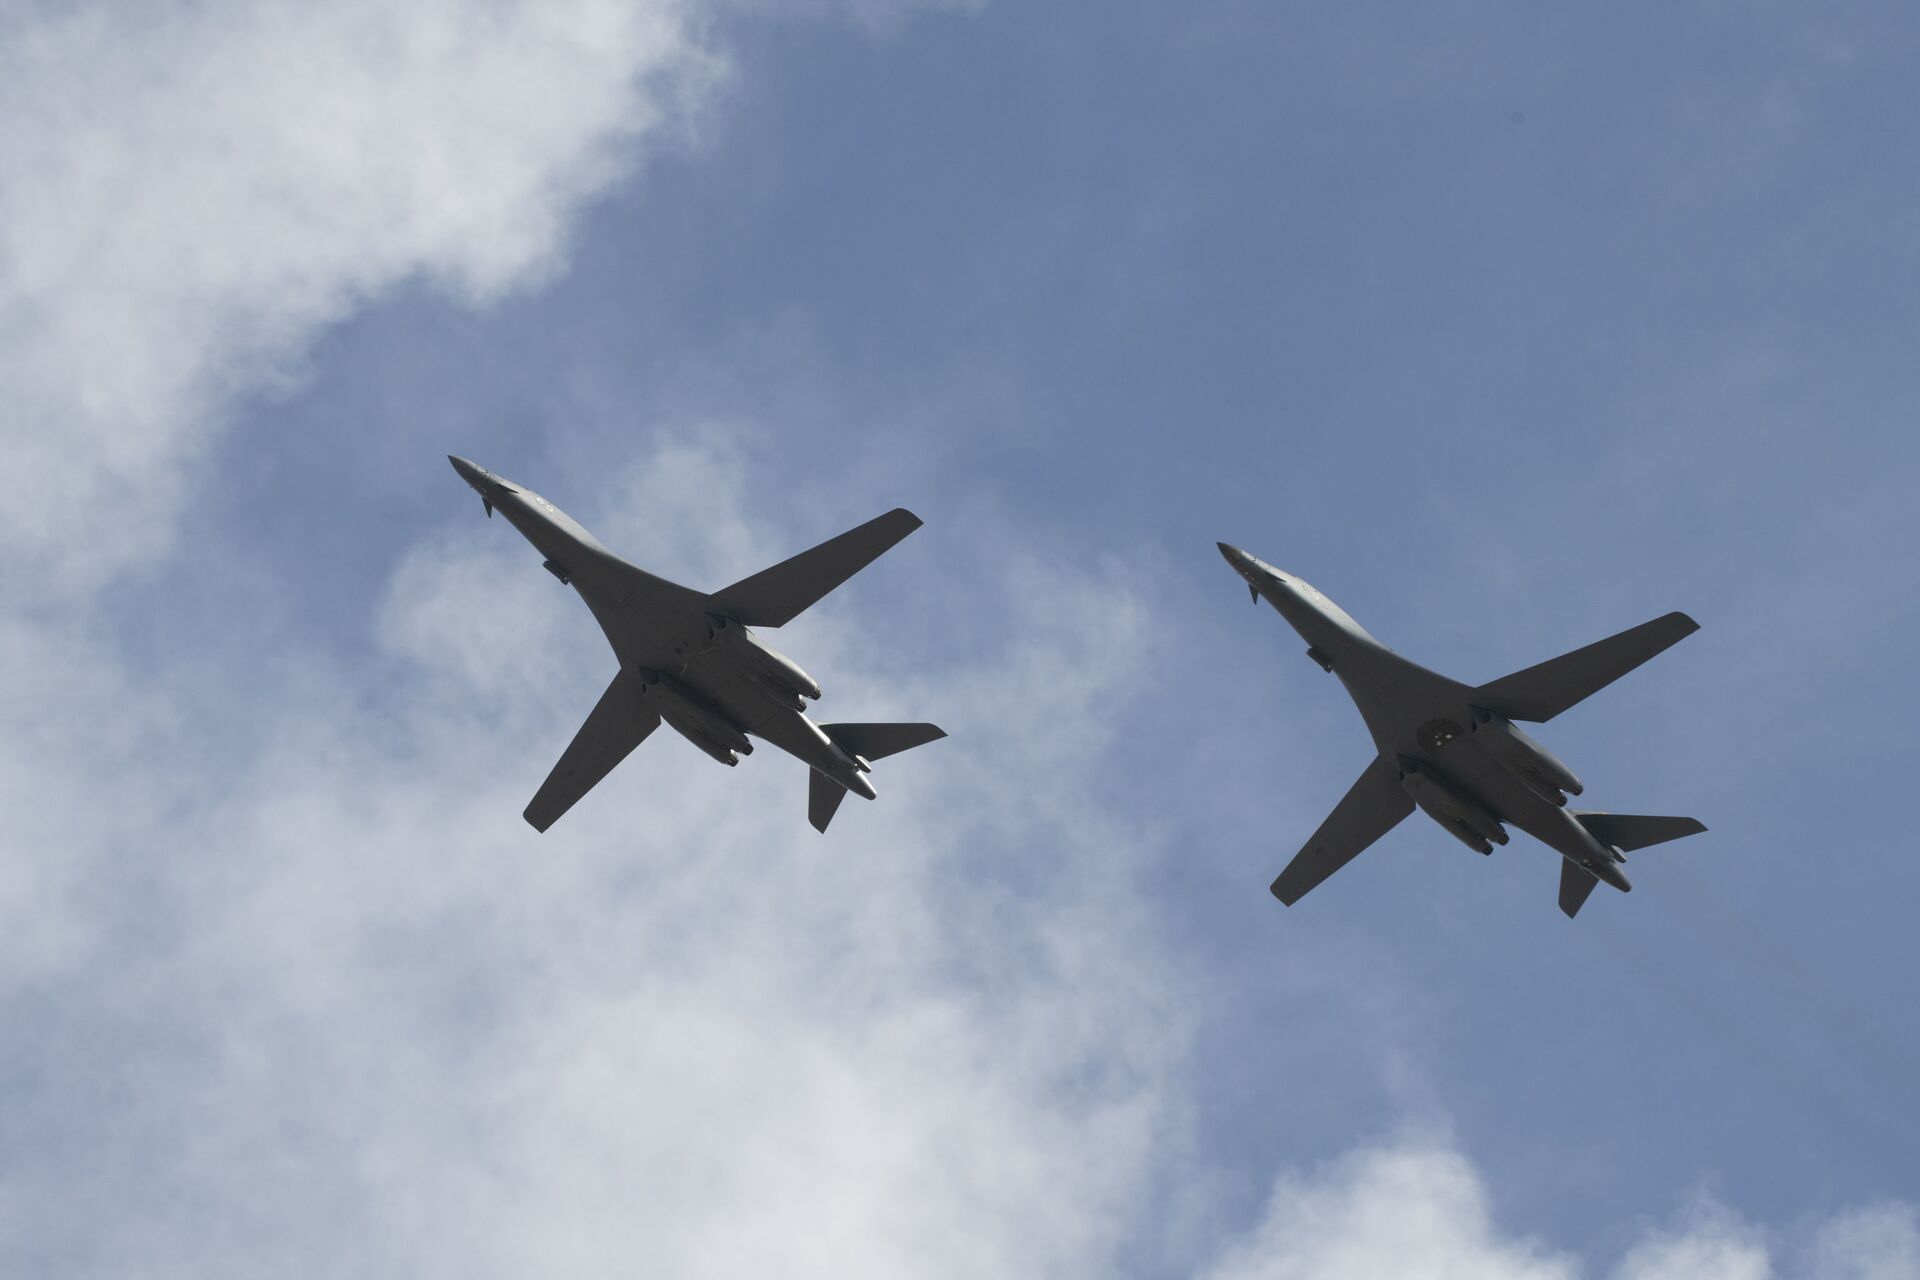 Two B-1B Lancers, assigned to the 28th Bomb Wing, Ellsworth Air Force Base, S.D., conduct a flyover before landing at Andersen AFB, Guam, July 17, 2020. The Bomber Task Force is deployed to Andersen AFB in support of Pacific Air Forces’ training efforts with allies, partners and joint forces. (U.S. Air Force Photo by Airman 1st Class Christina Bennett) - Sputnik International, 1920, 07.09.2021